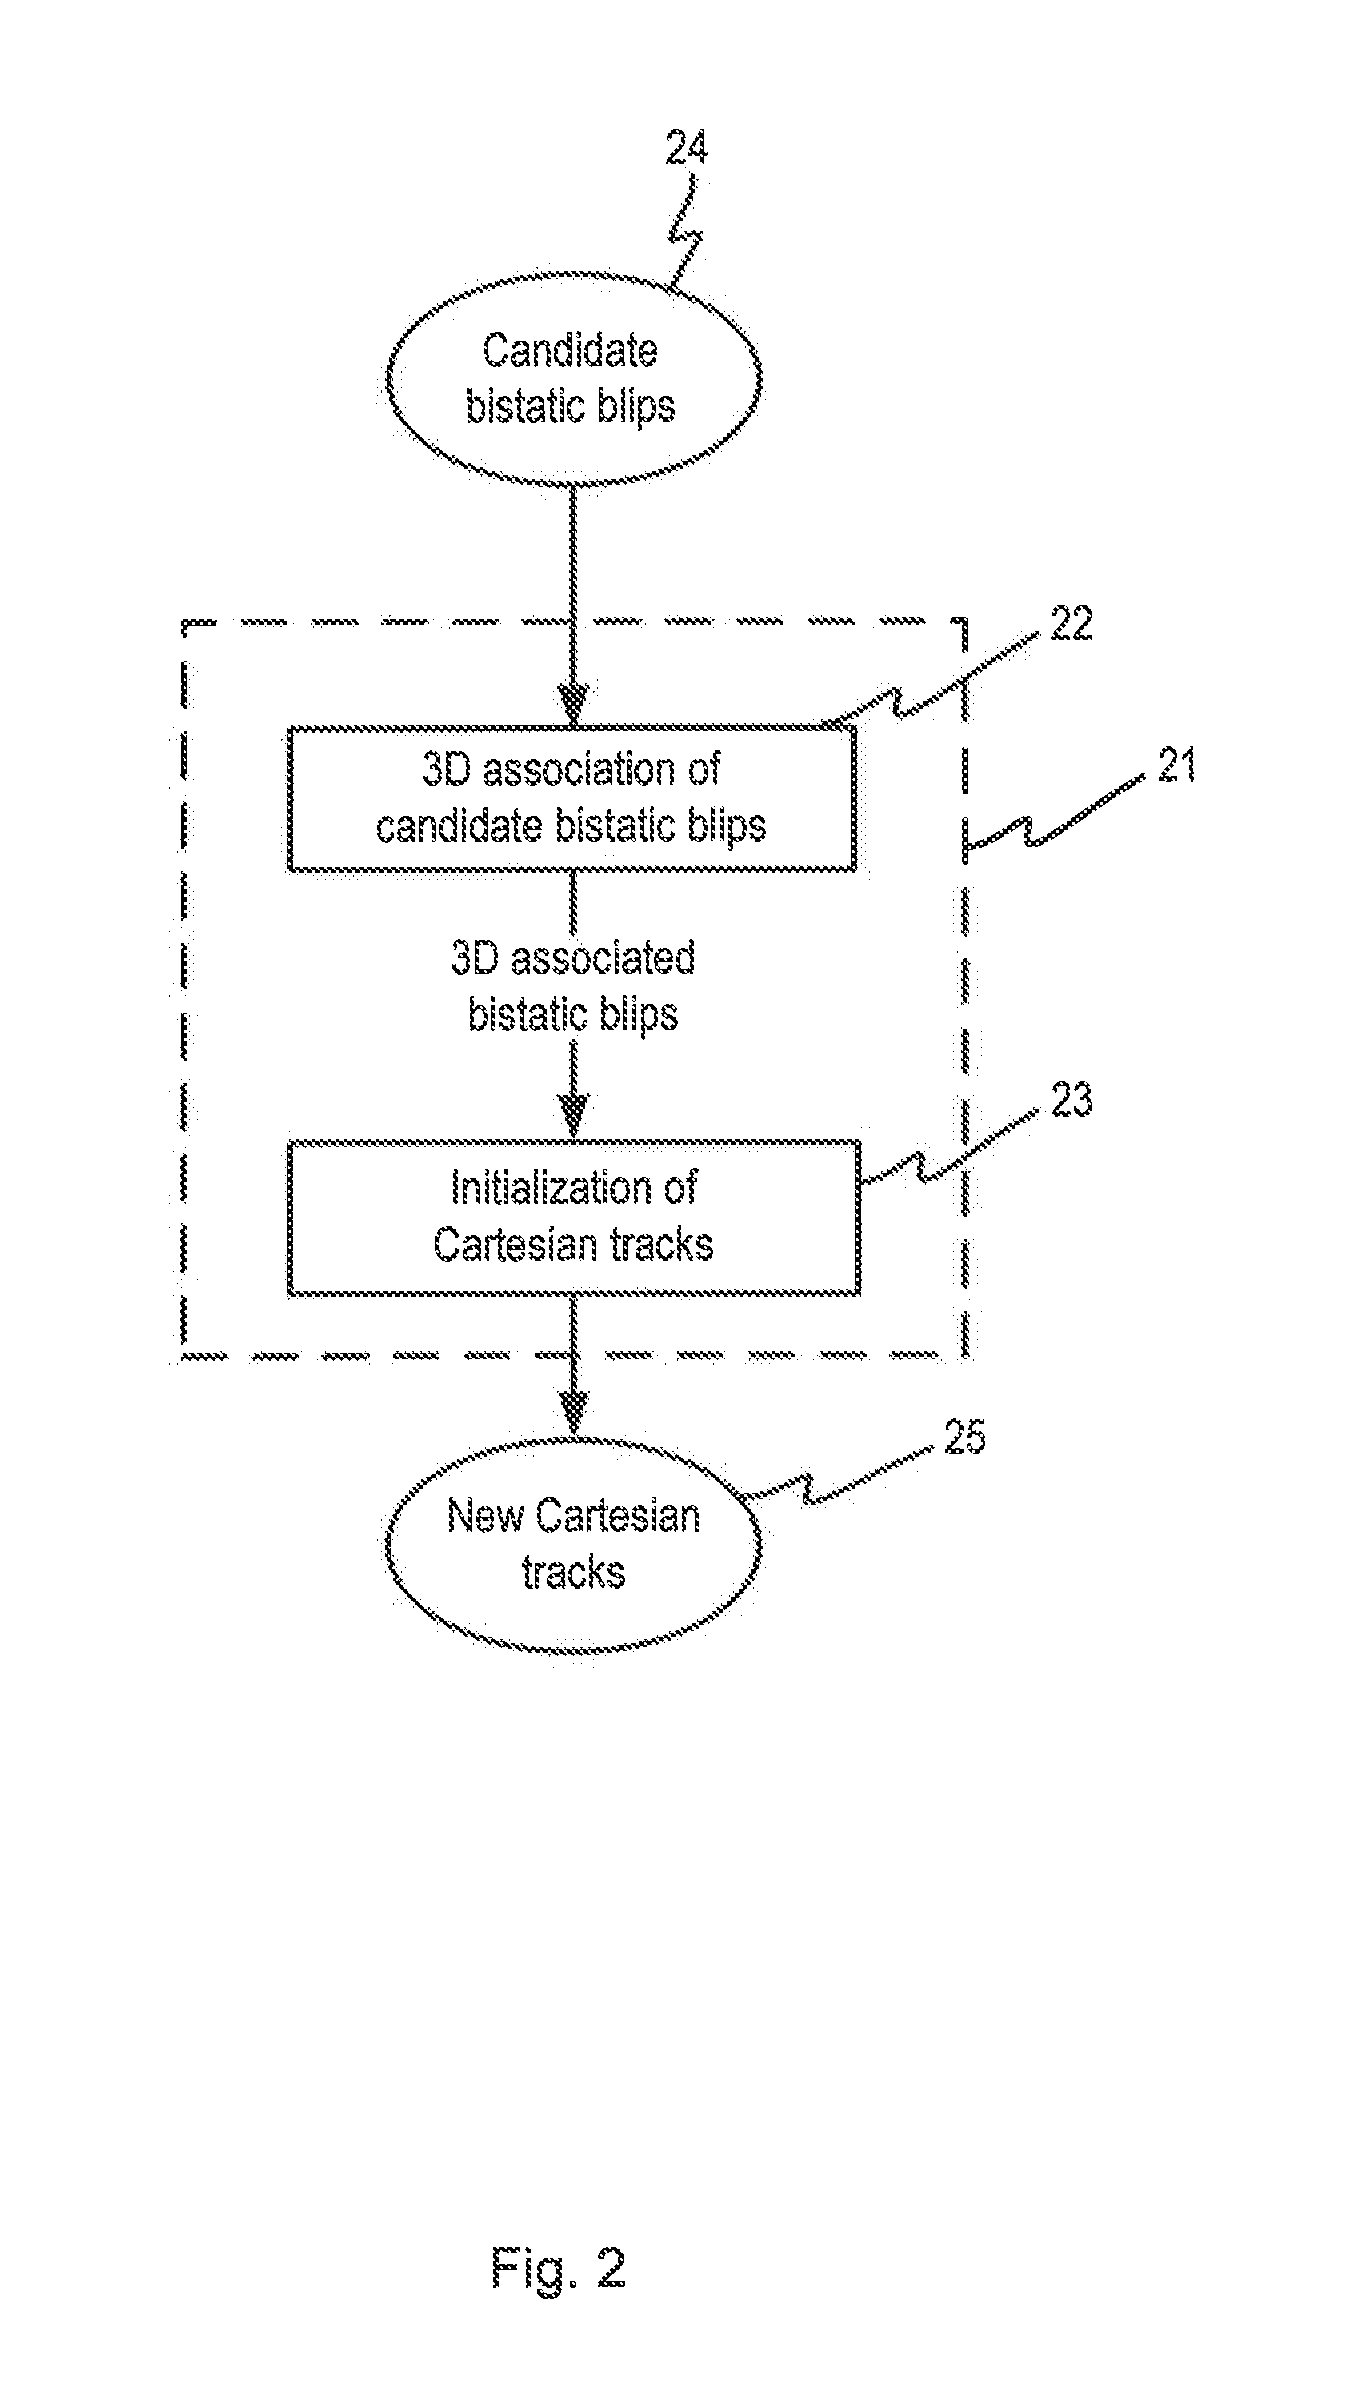 Method for initializing cartesian tracks based on bistatic measurements performed by one or more receivers of a multistatic radar system